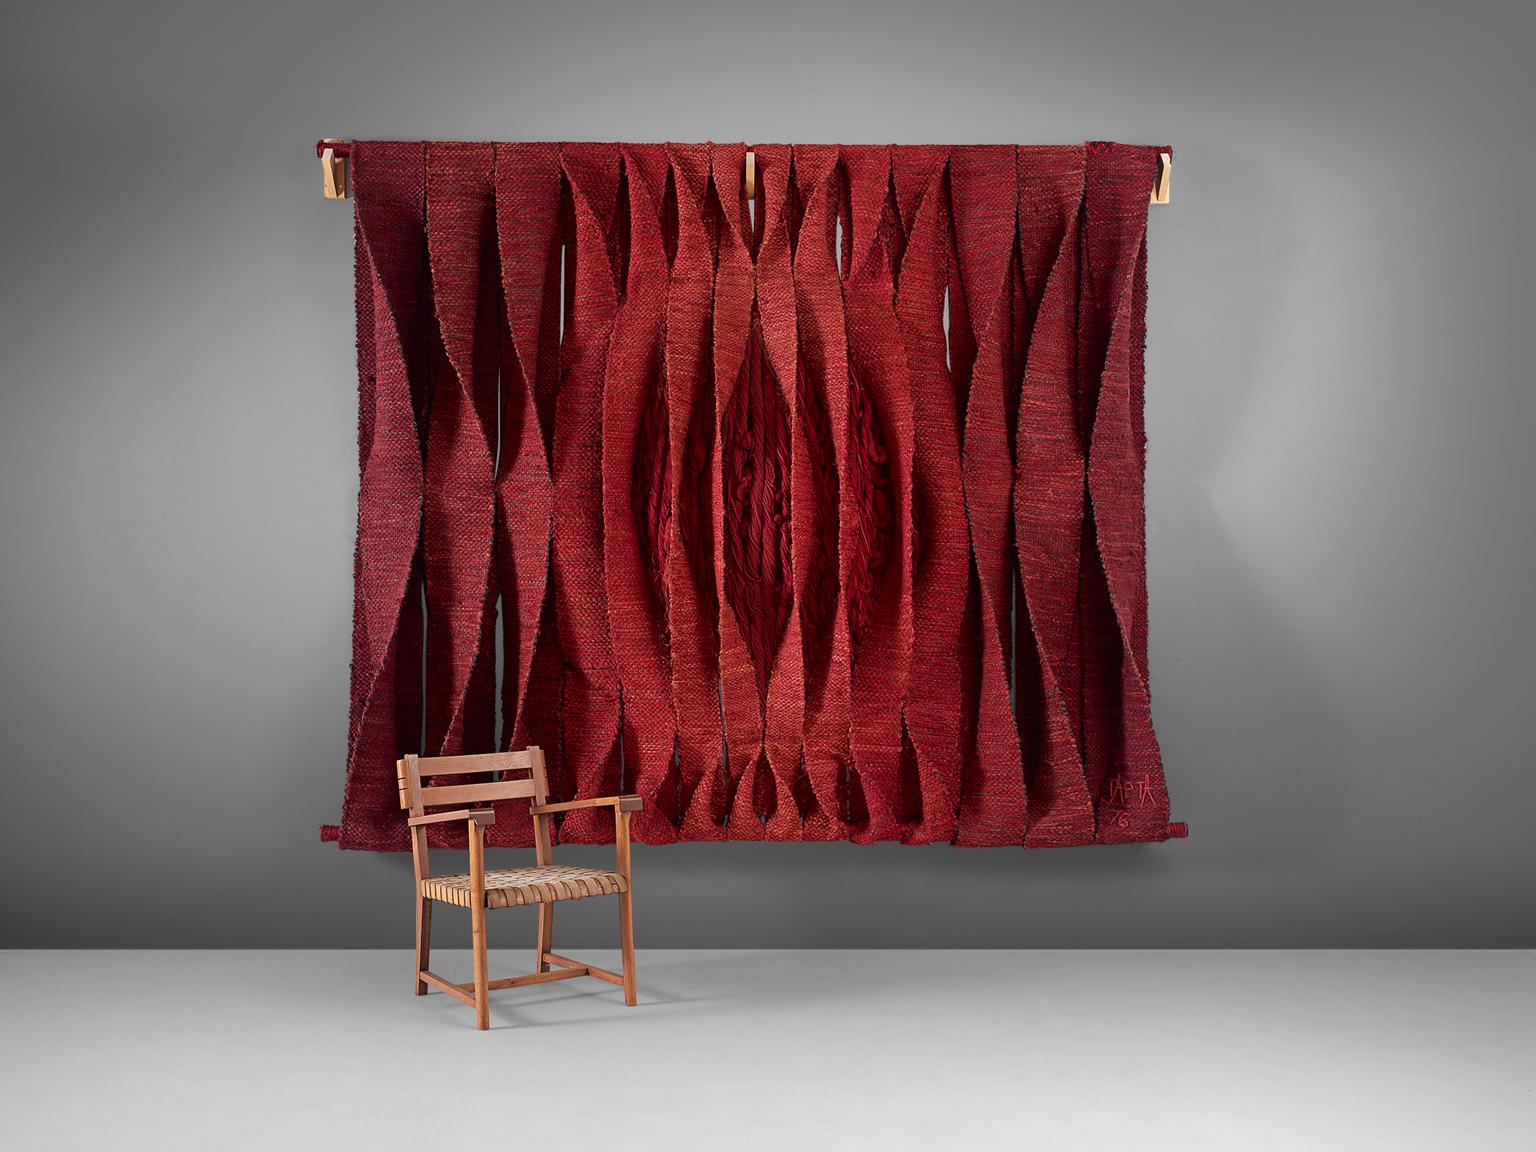 Maria Tapta, wall hanging art work, in mixed textiles, Belgium, 1976.

Stunning large wall sculpture in divers textiles and mixed techniques. This tapestry consists of several woven straps in all shades of red and orange. Due their twists these